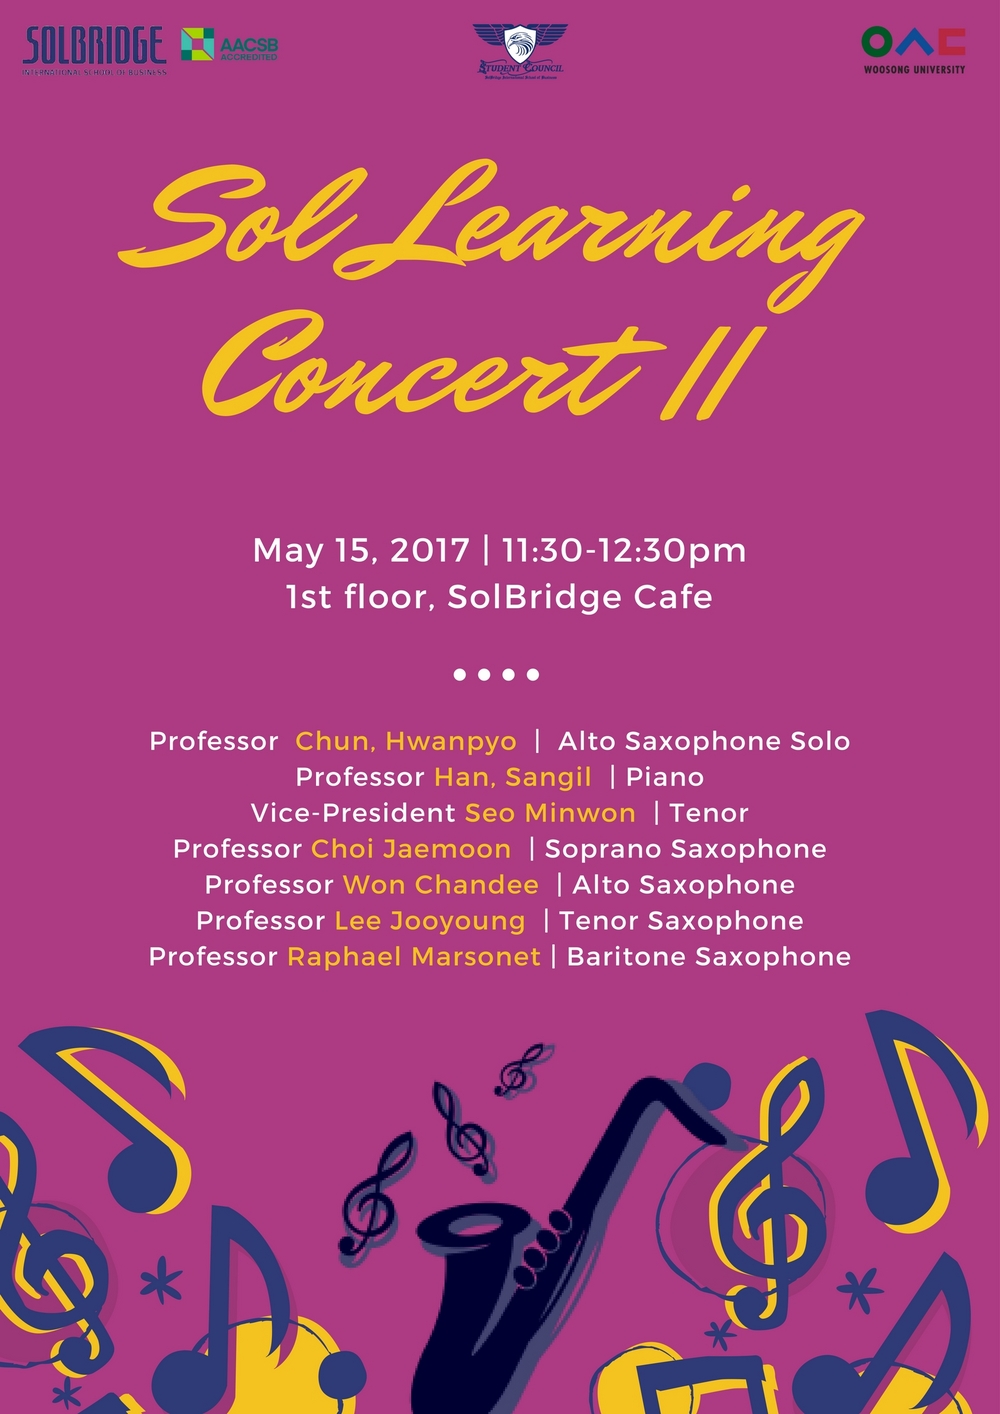 Sol Learning Concert II